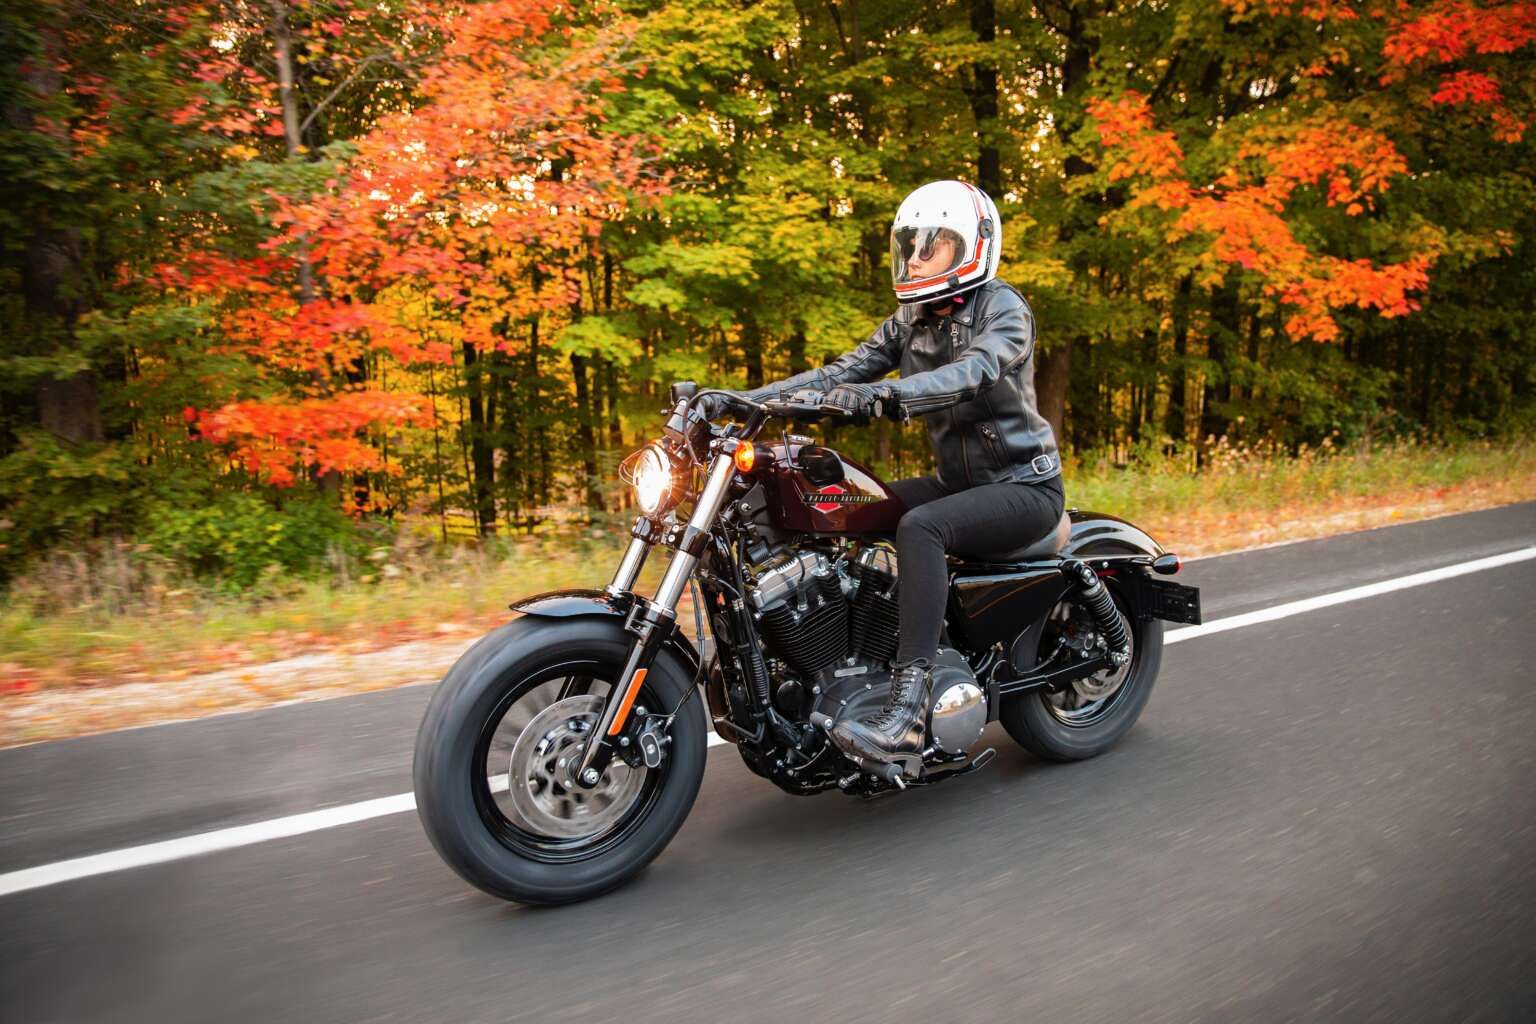 A woman drives the 2021 Harley Davidson Forty-Eight down a road during the autumn season.